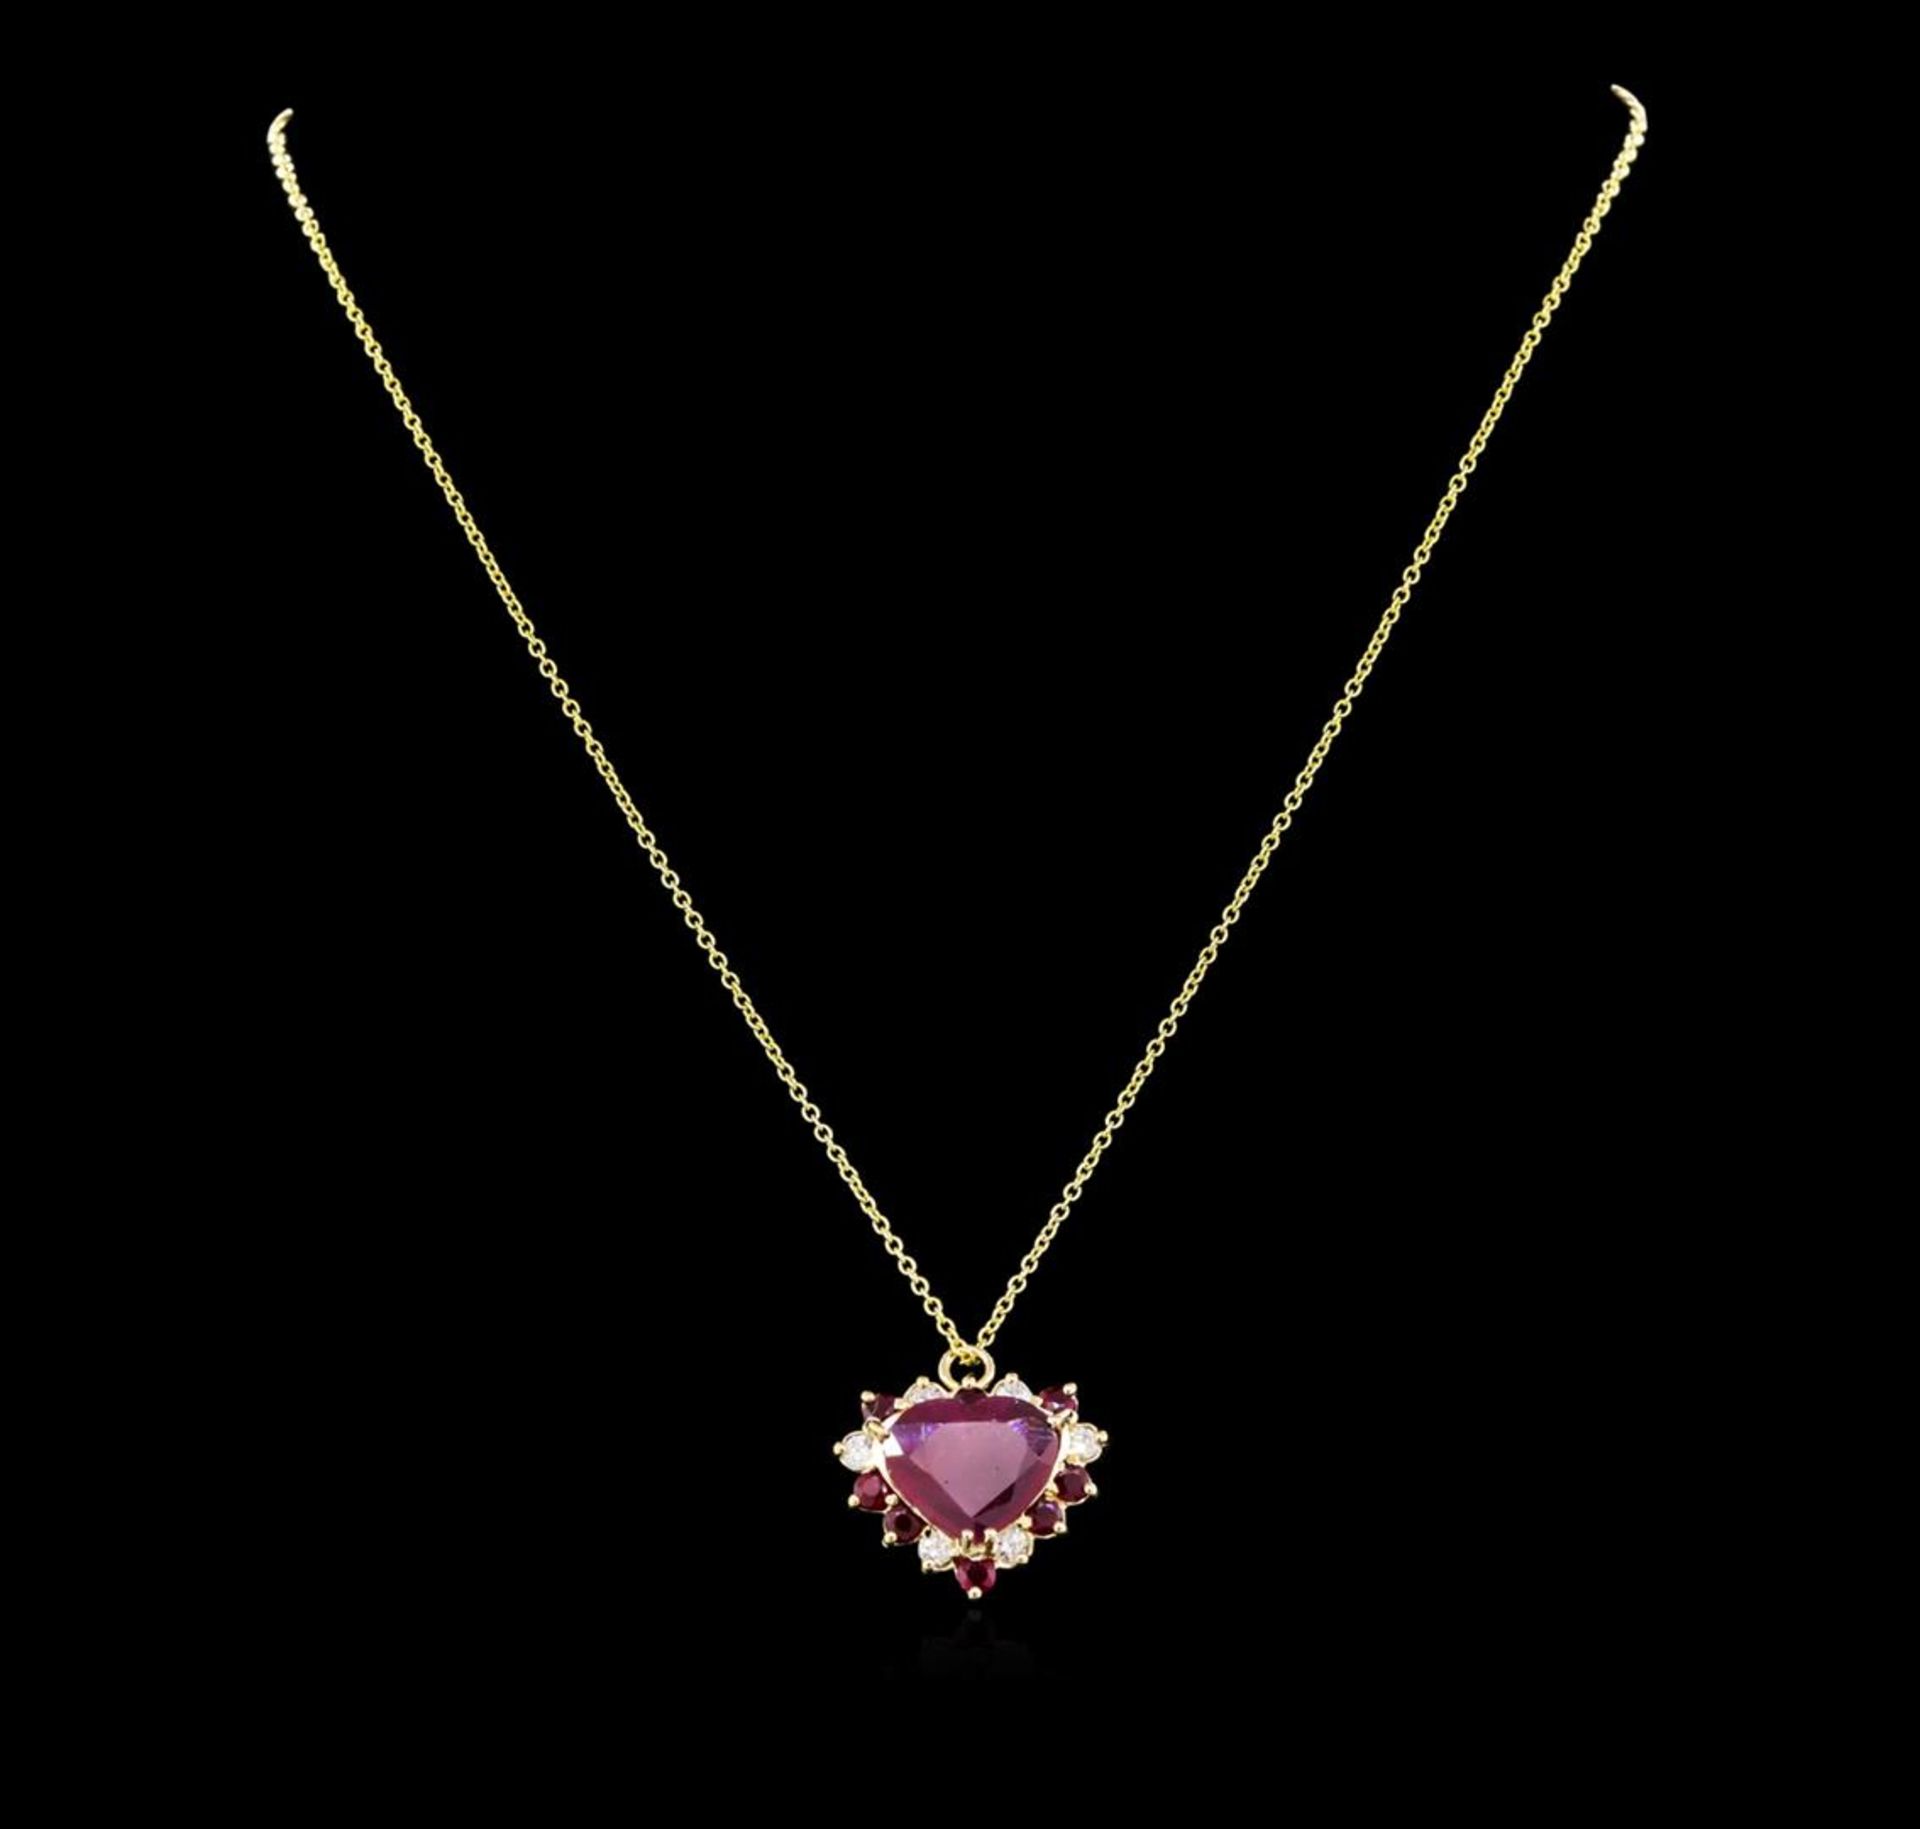 5.29 ctw Ruby and Diamond Pendant - 14KT Yellow Gold